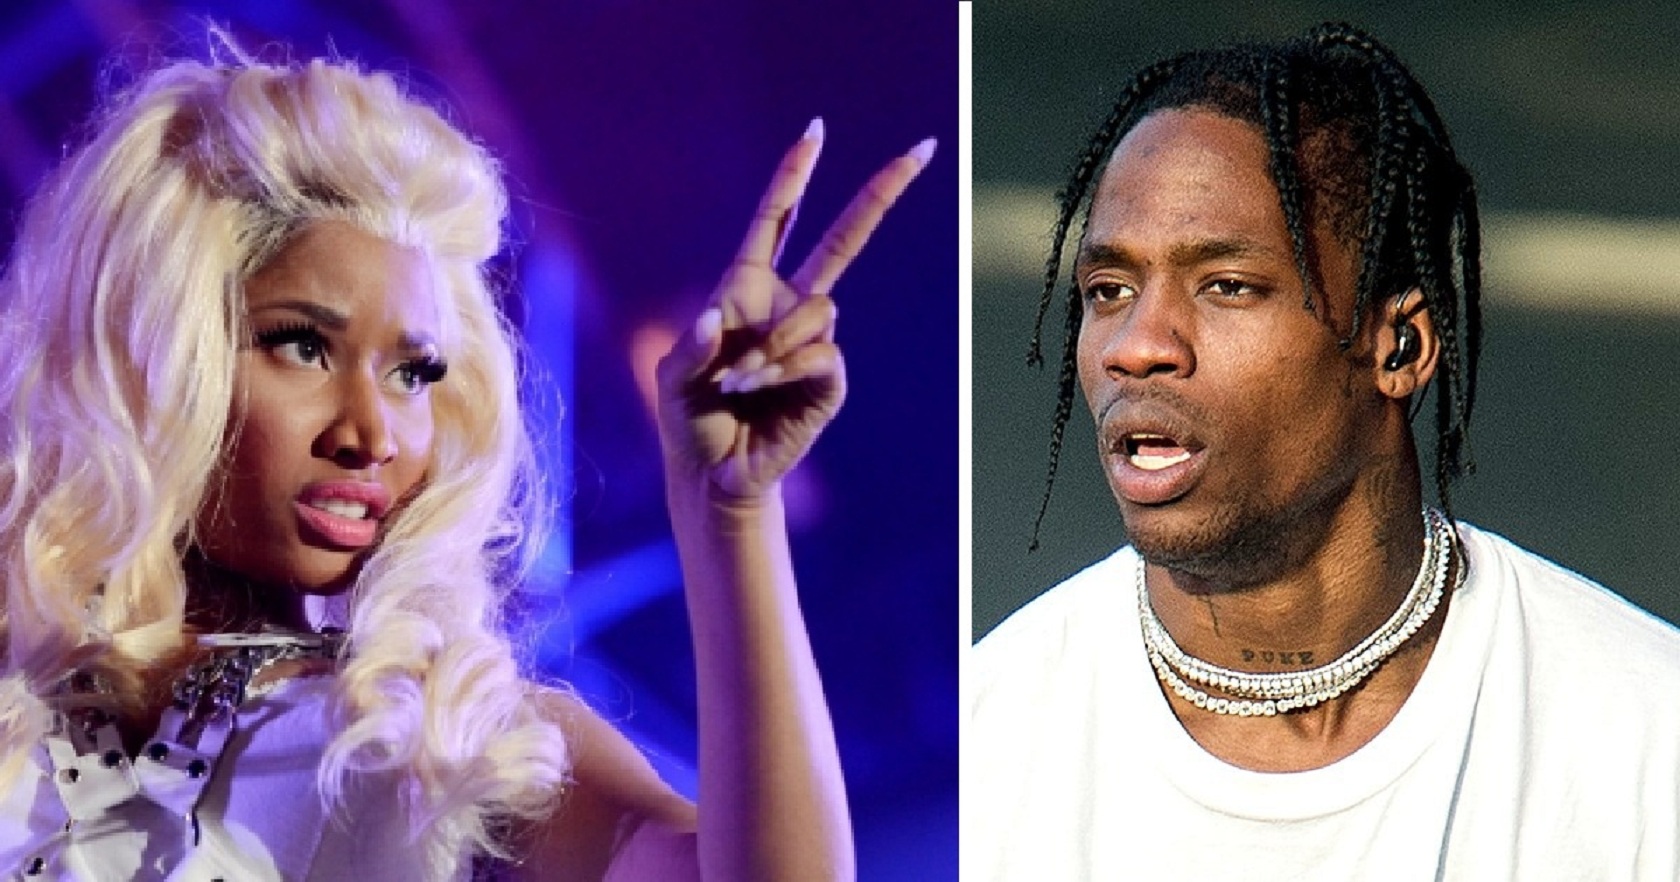 Nicki Minaj wanted to “Punch Travis Scott in his f*cking face” for having a #1 over her!